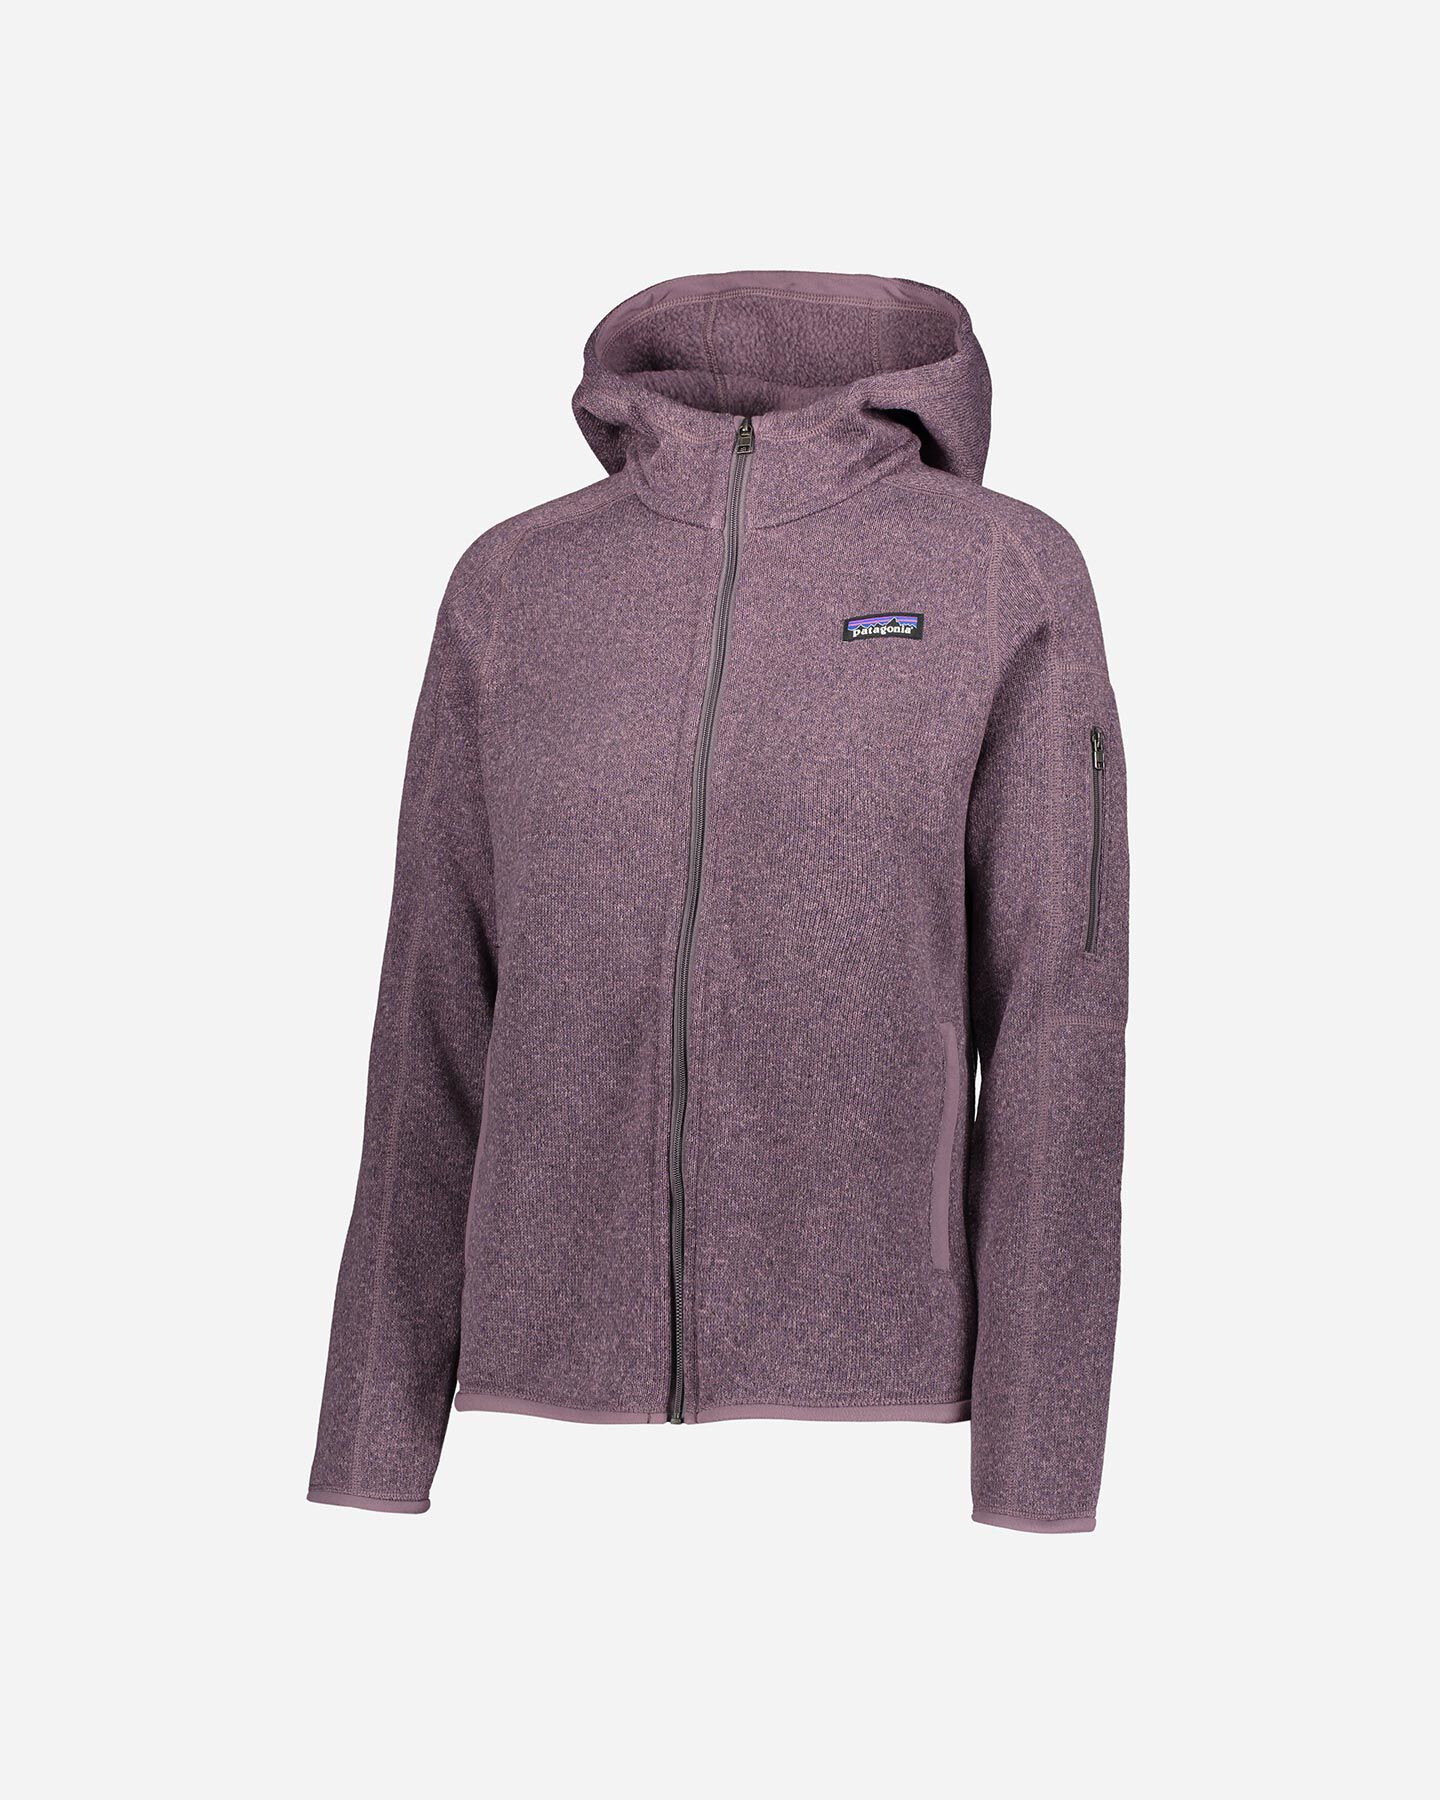  Pile PATAGONIA BETTER SWEATER HD W S4081855|HYSP|XS scatto 0